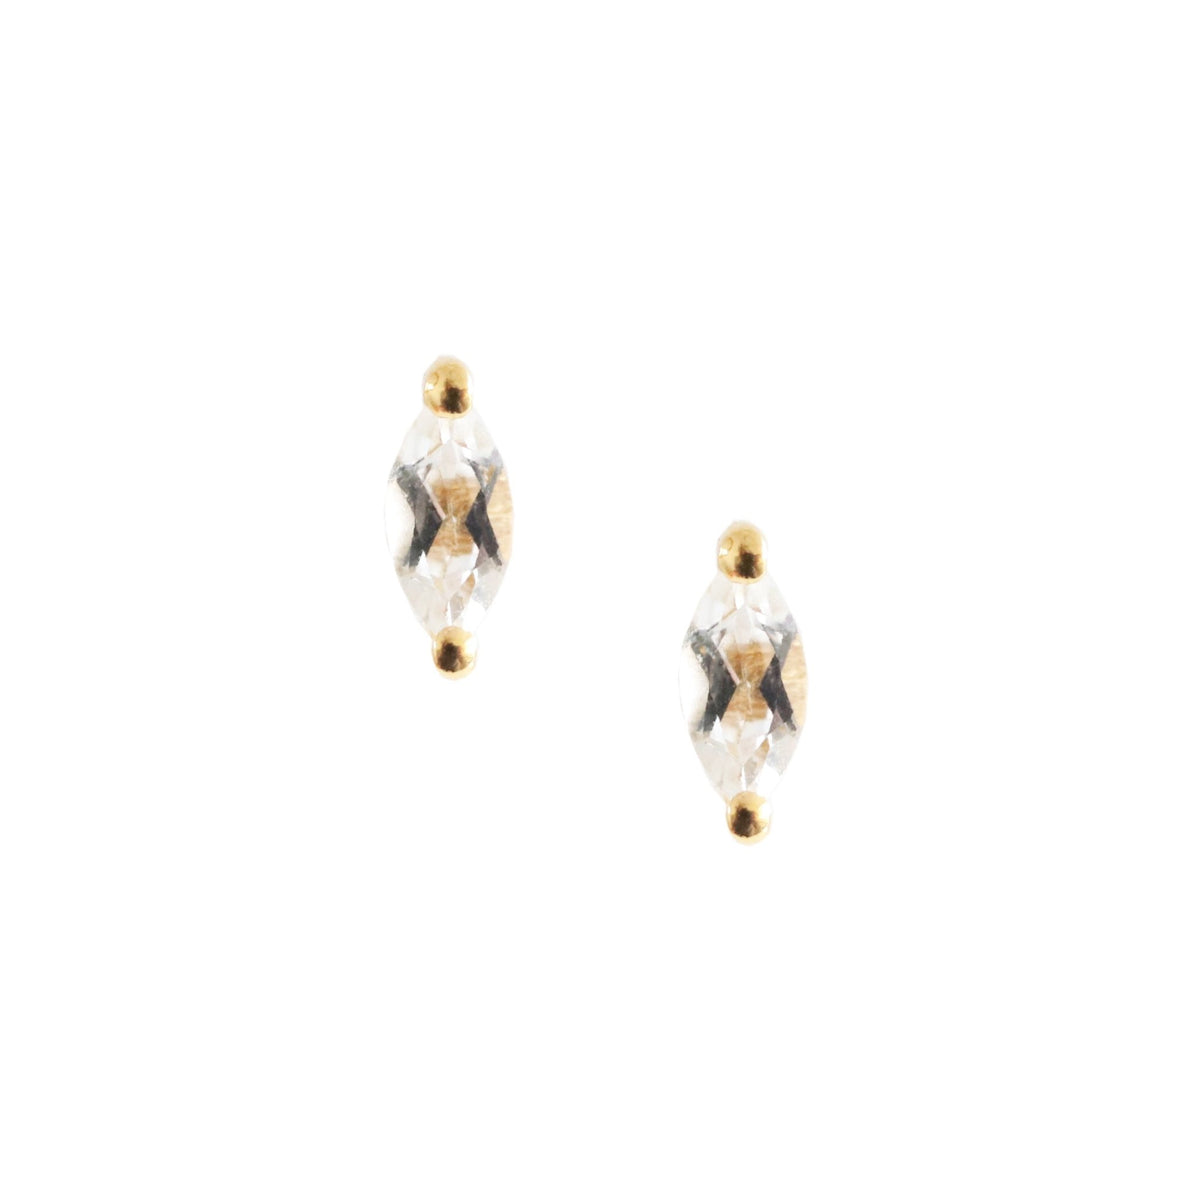 TINY LOVE MARQUIESE STUDS - WHITE TOPAZ &amp; GOLD - SO PRETTY CARA COTTER